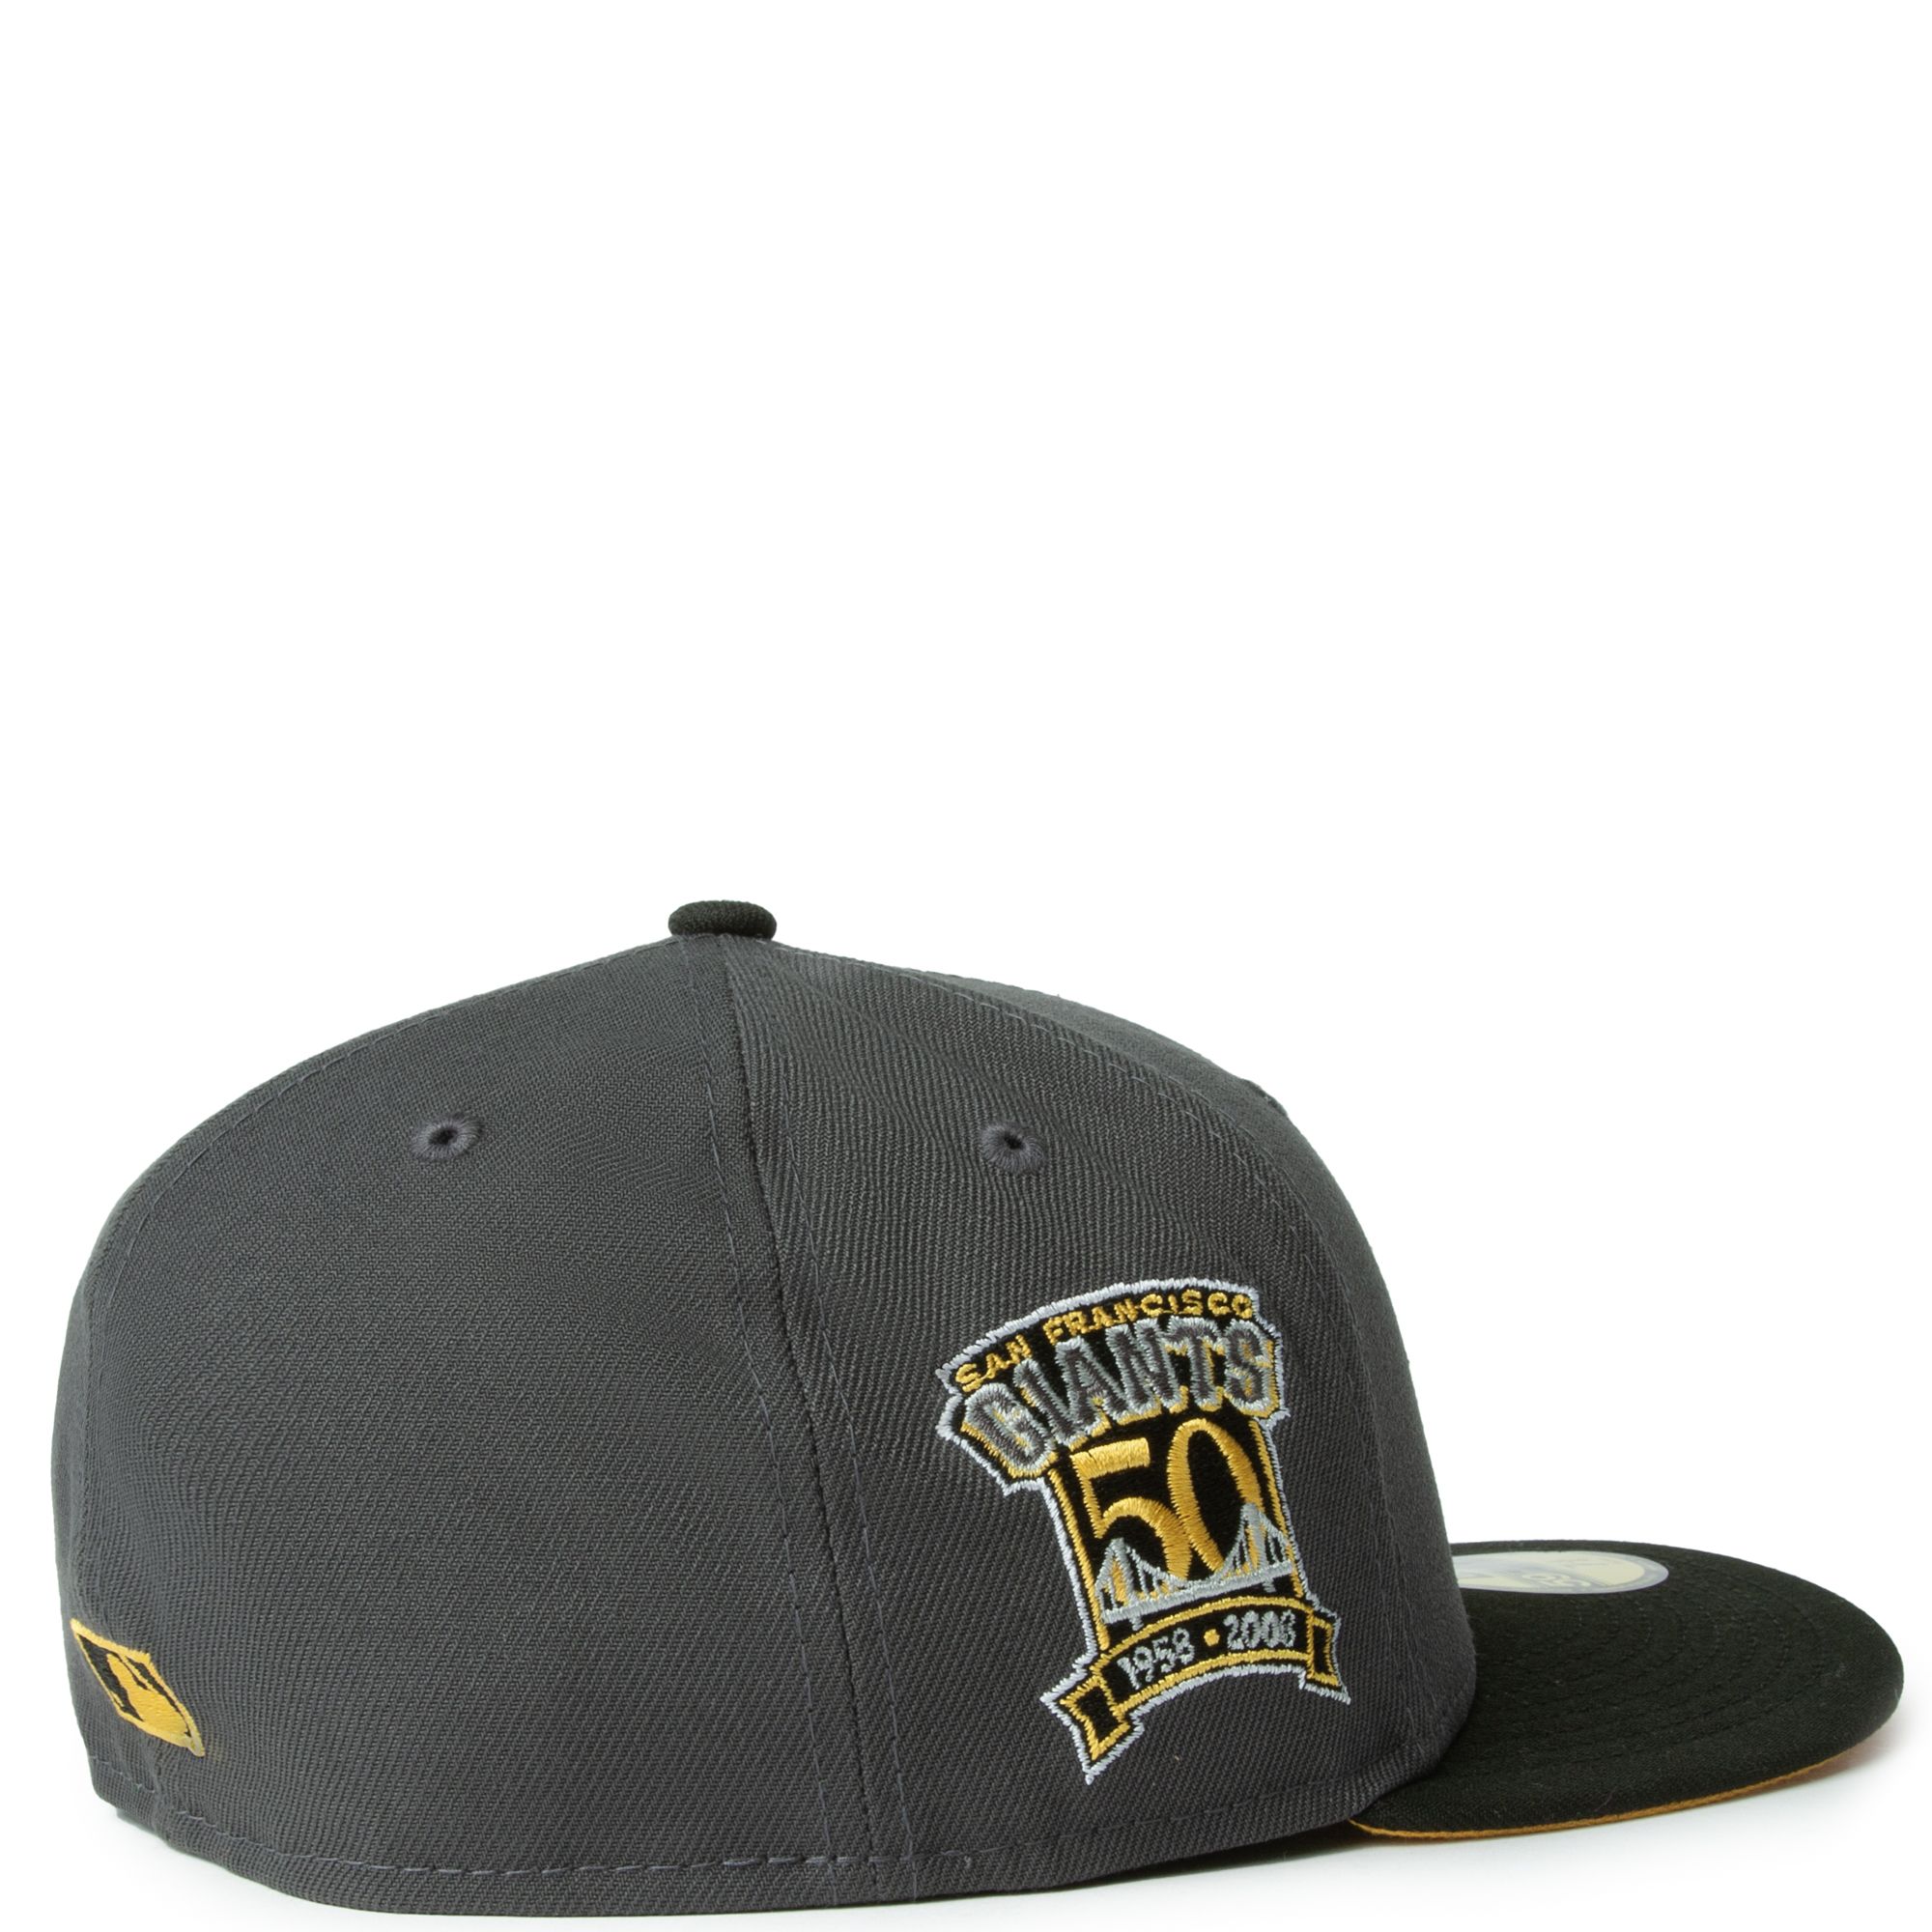 San Francisco Giants World Series New Era 59Fifty Fitted hat (Black White  Gray Under Brim)